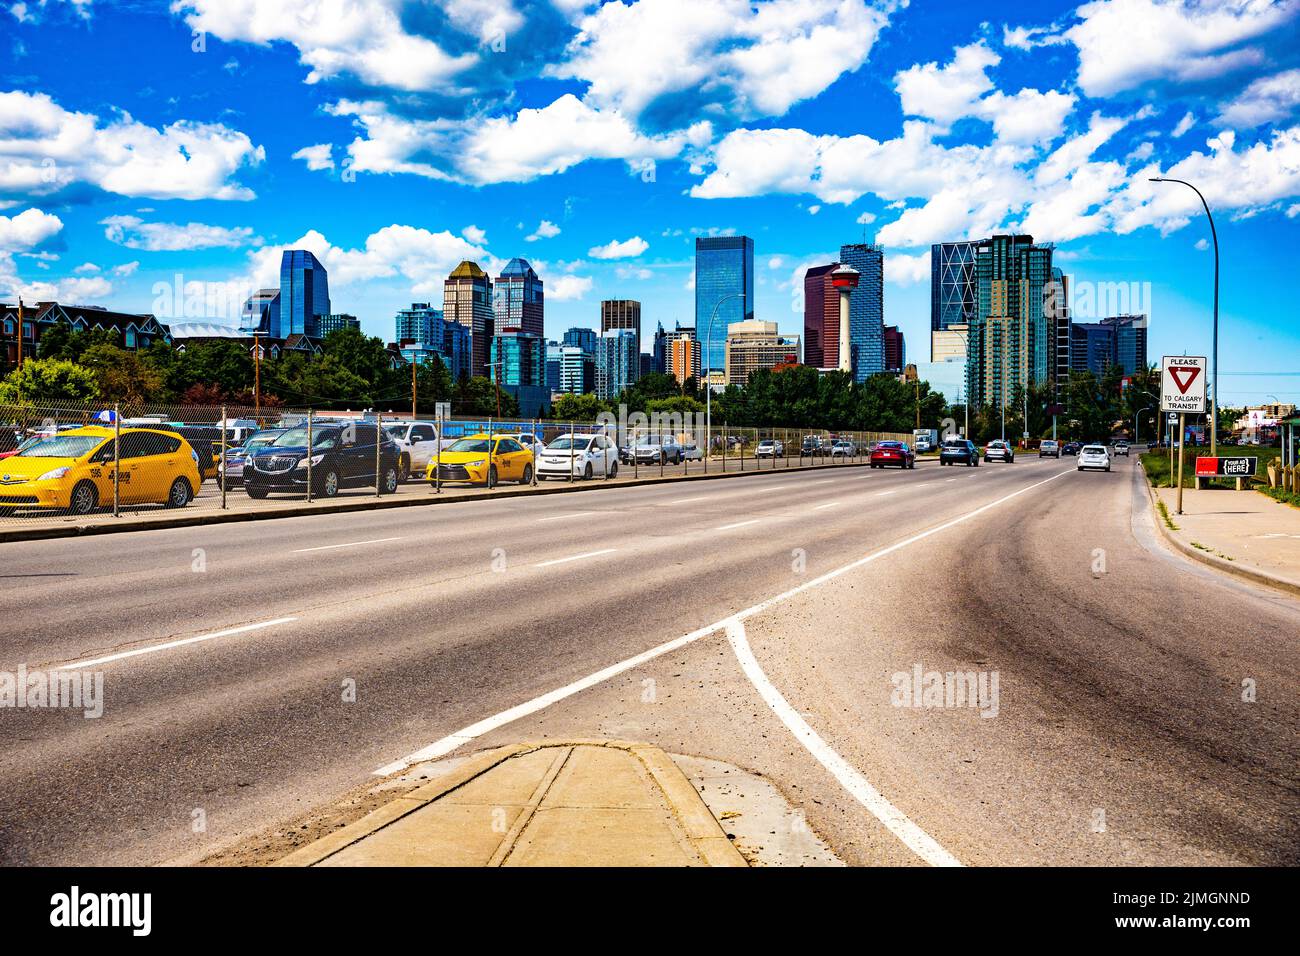 A vibrant cityscape of downtown Calgary in Alberta, Canada, against the bright cloudy sky Stock Photo